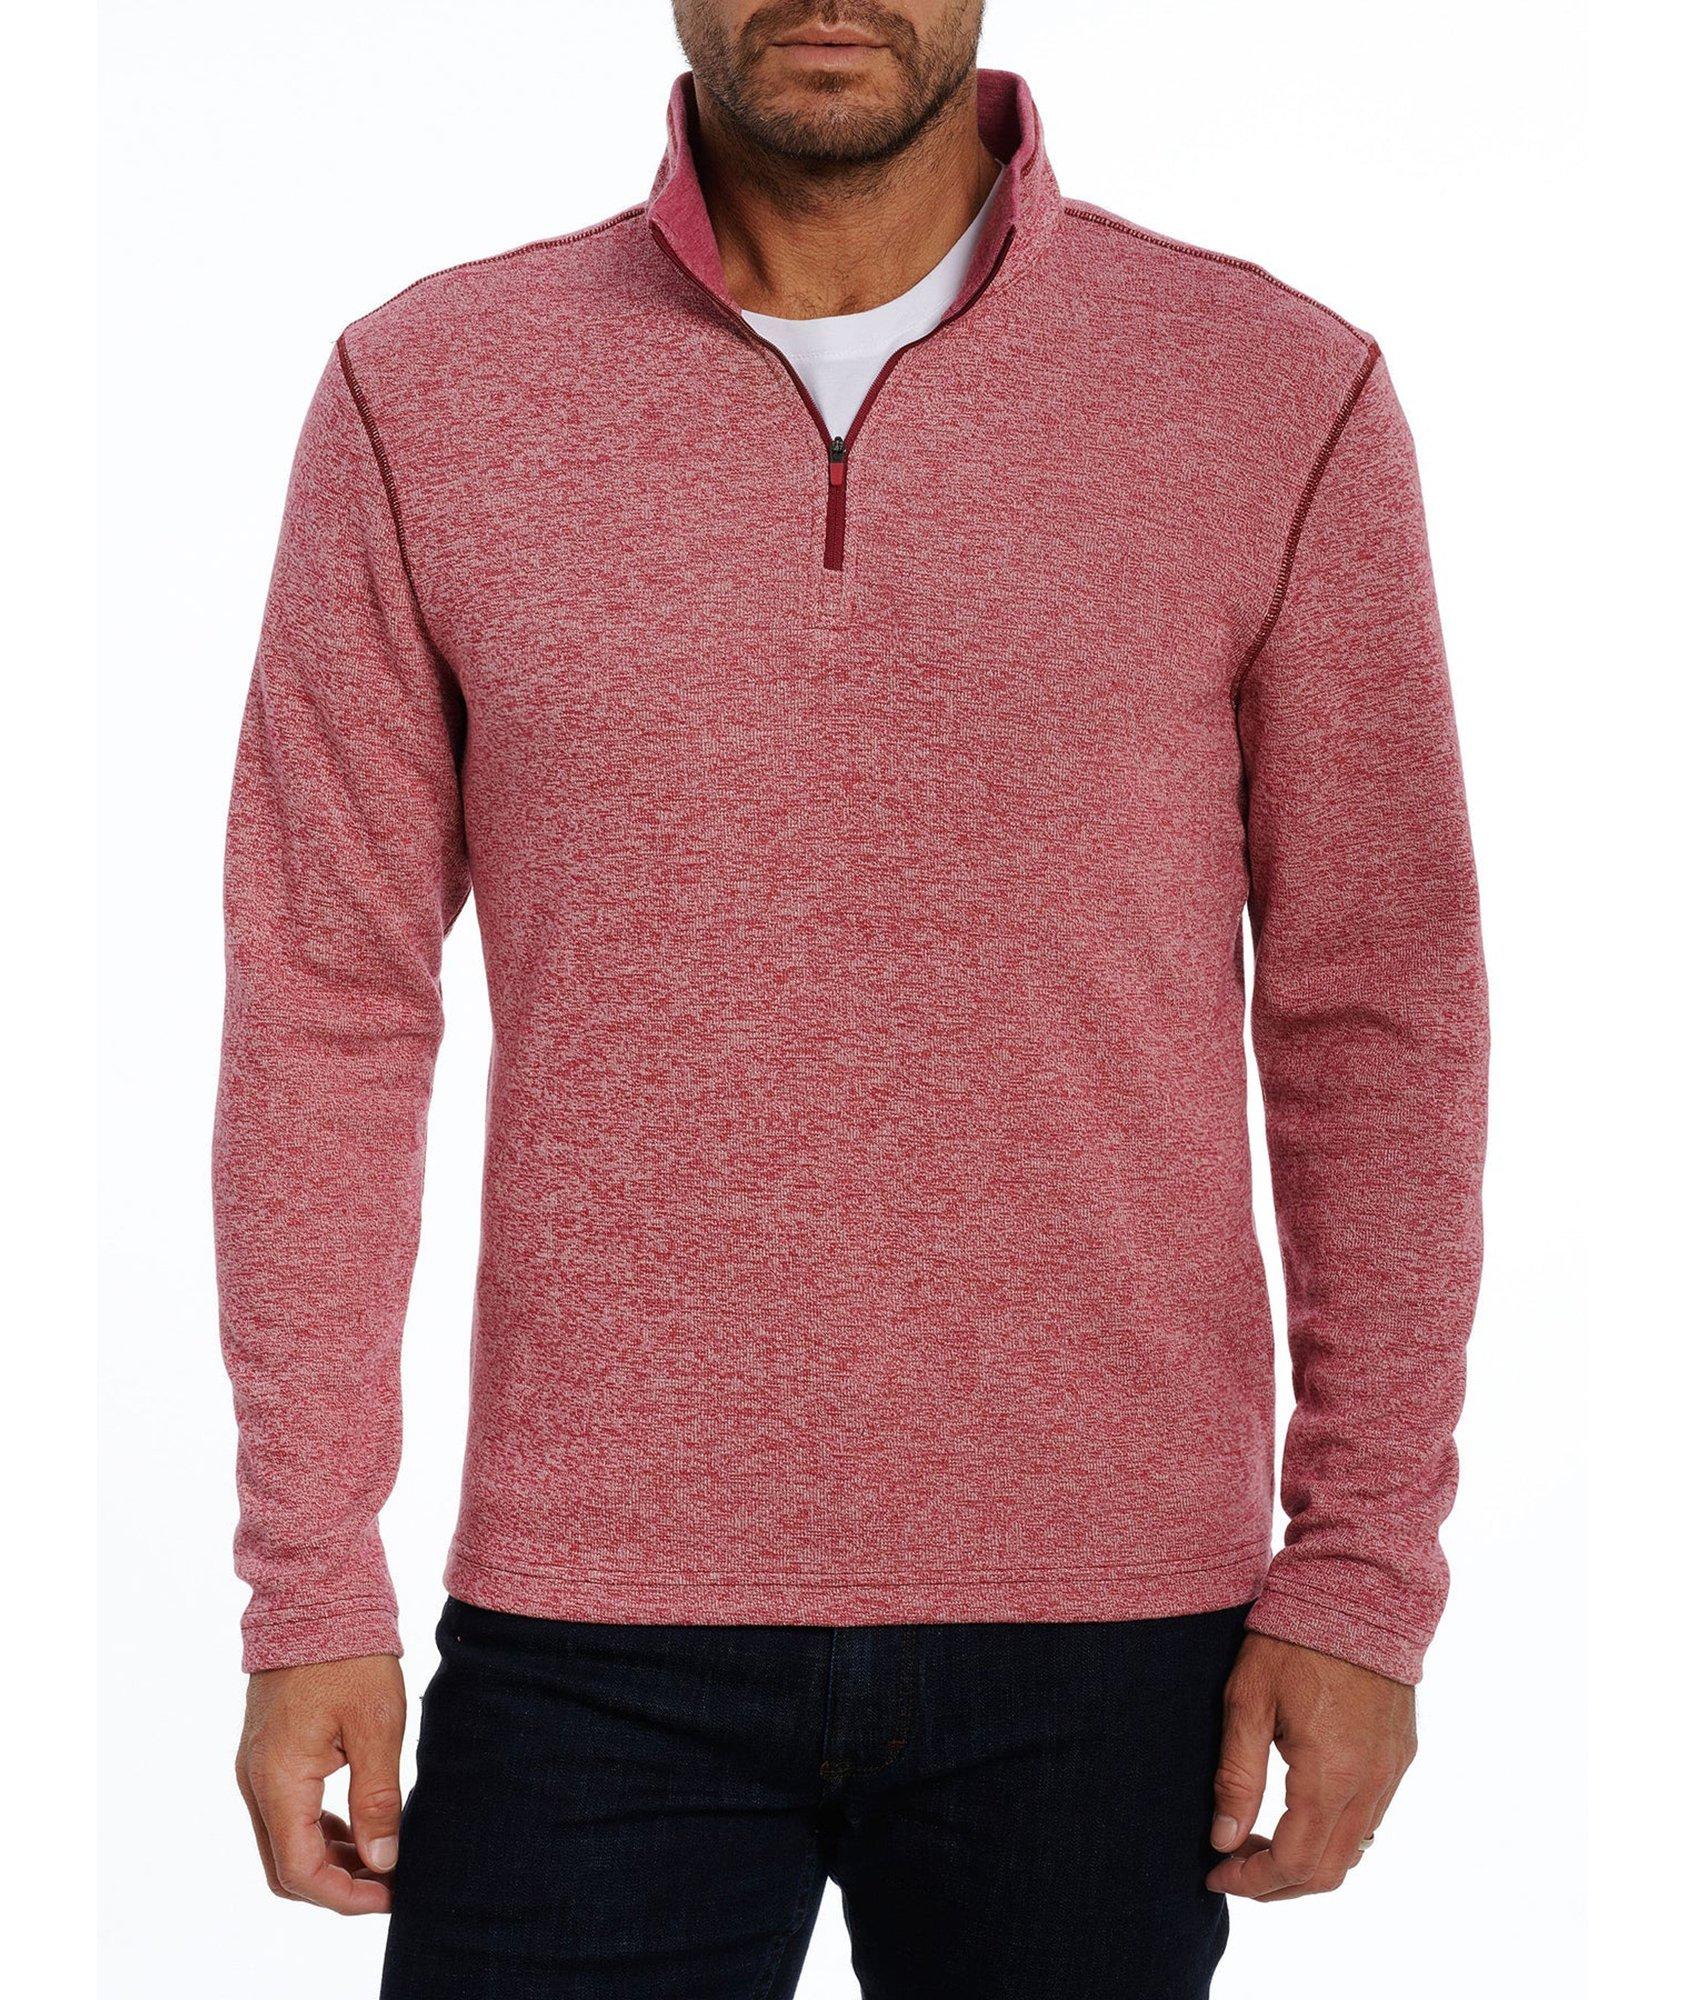 Handley Long Sleeve Classic Fit Knit image 0